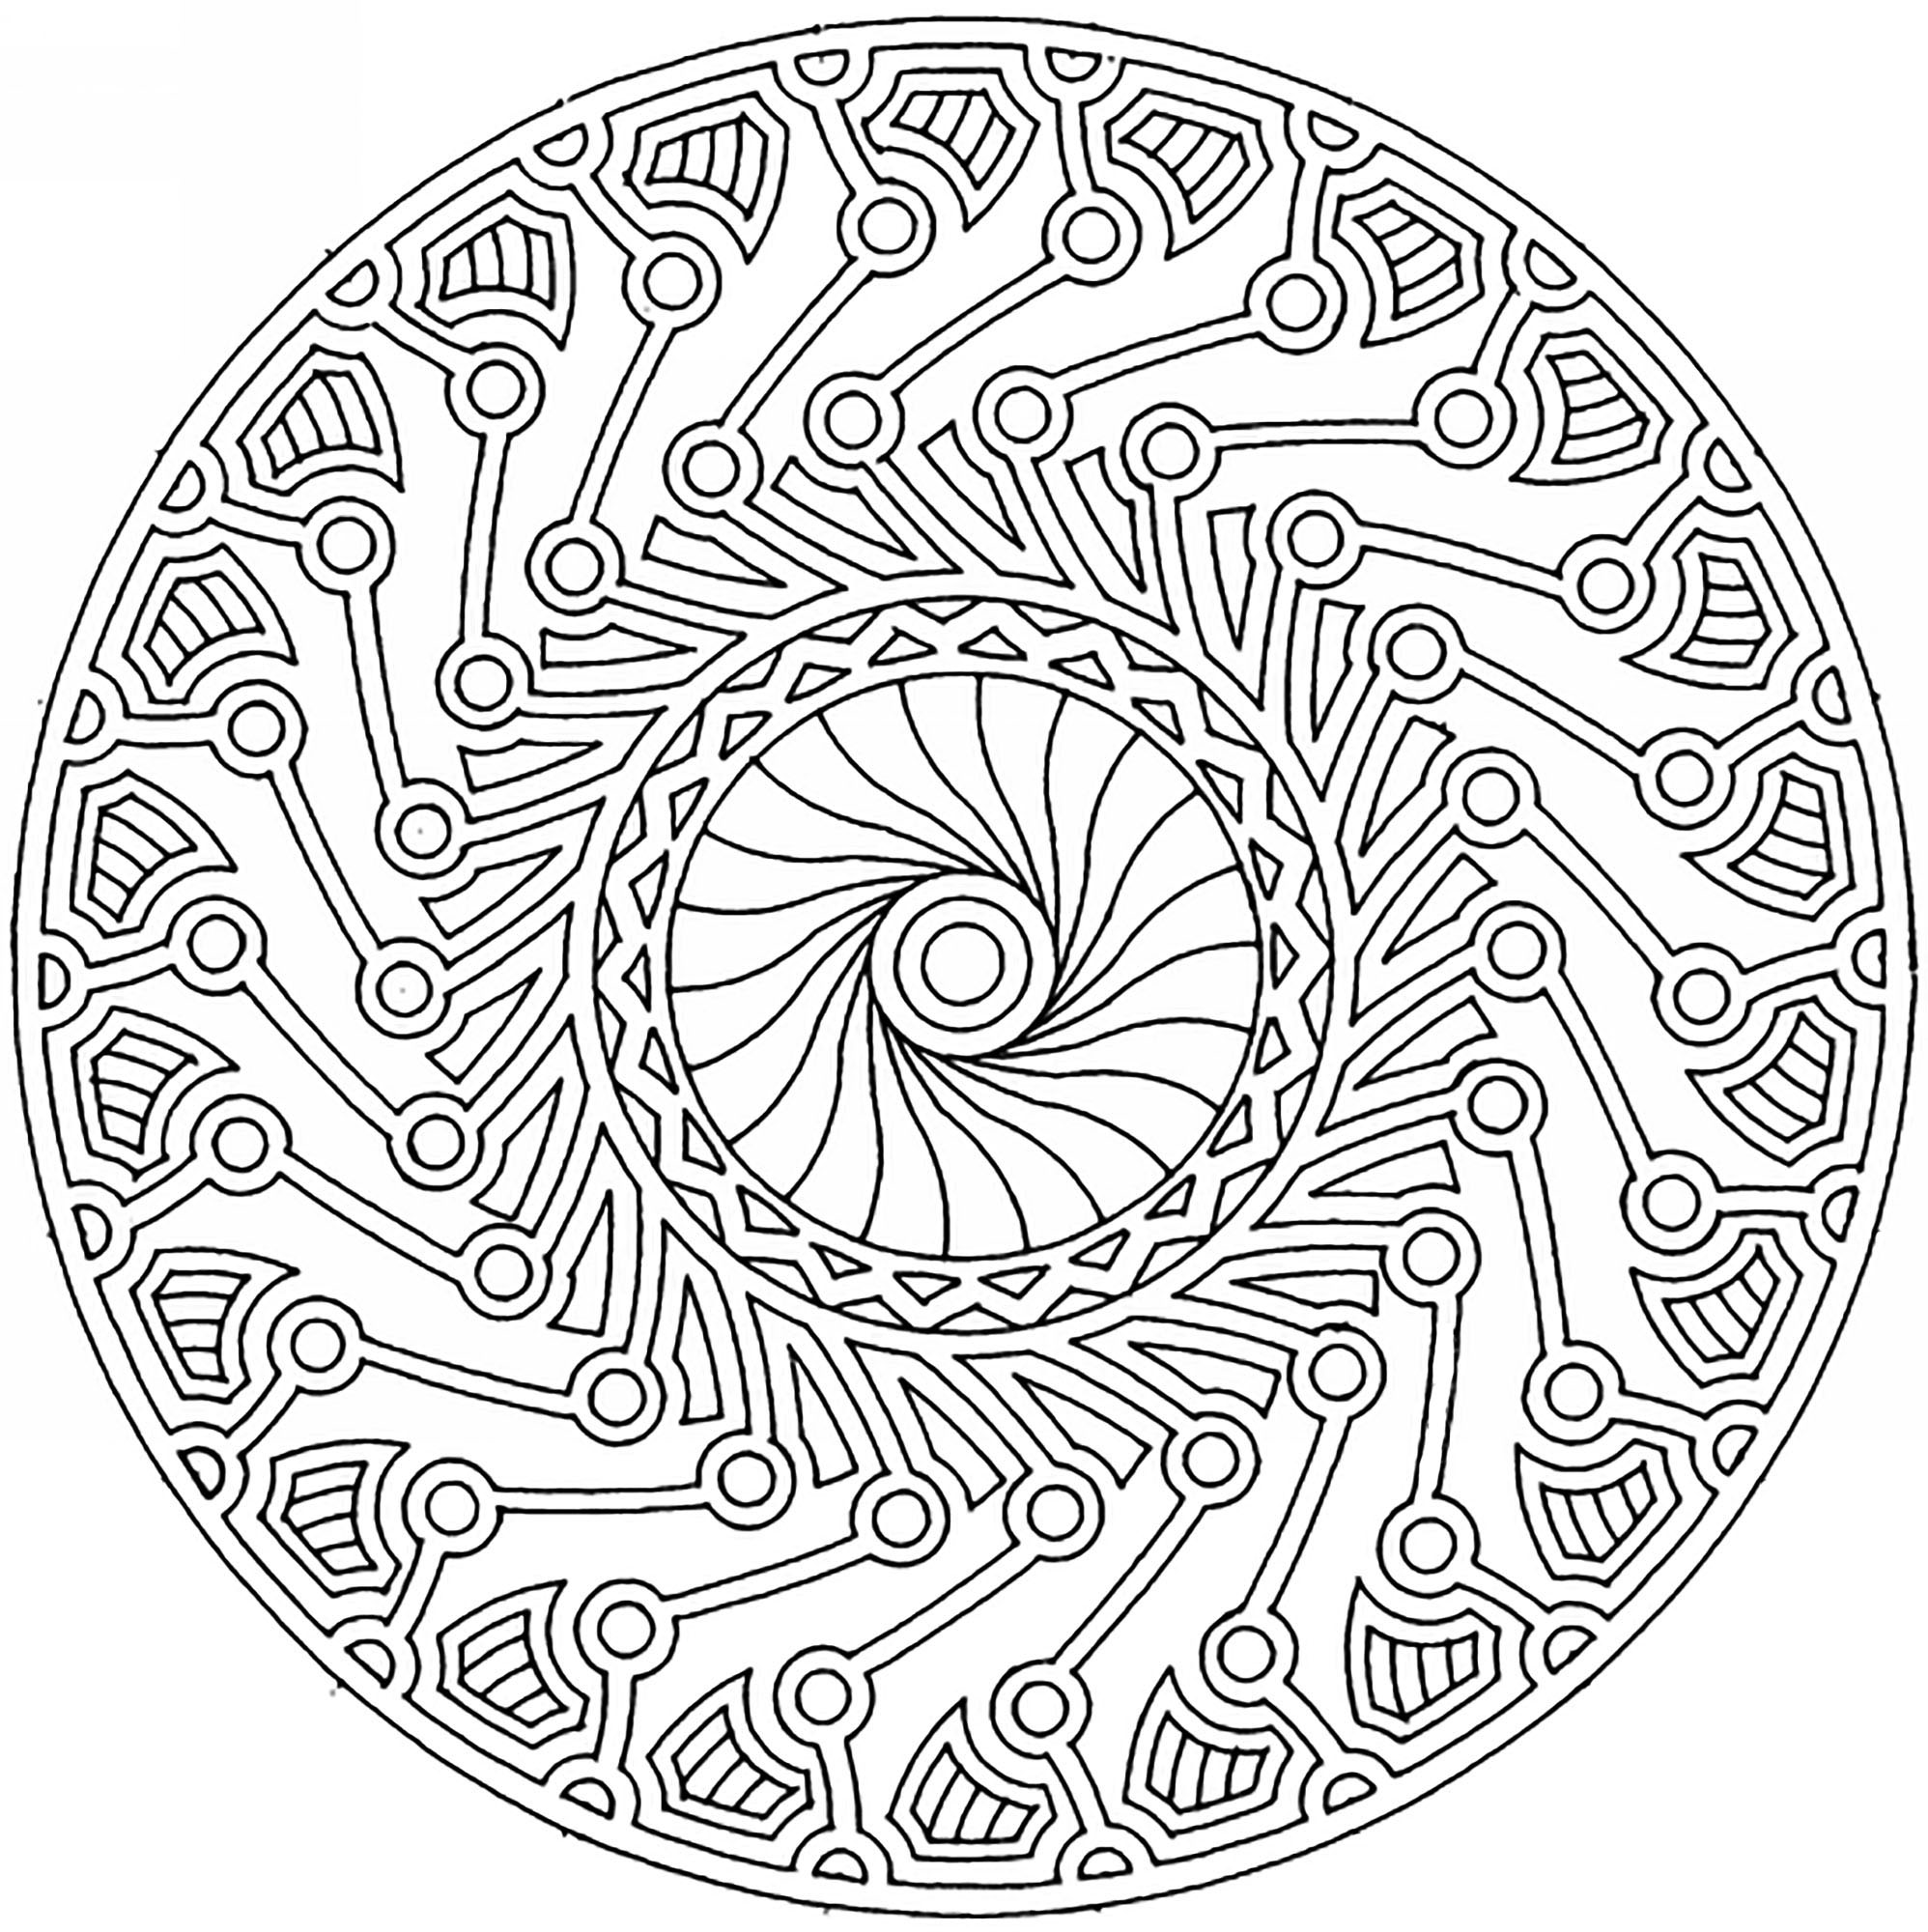 Mandalas - Coloring pages for adults